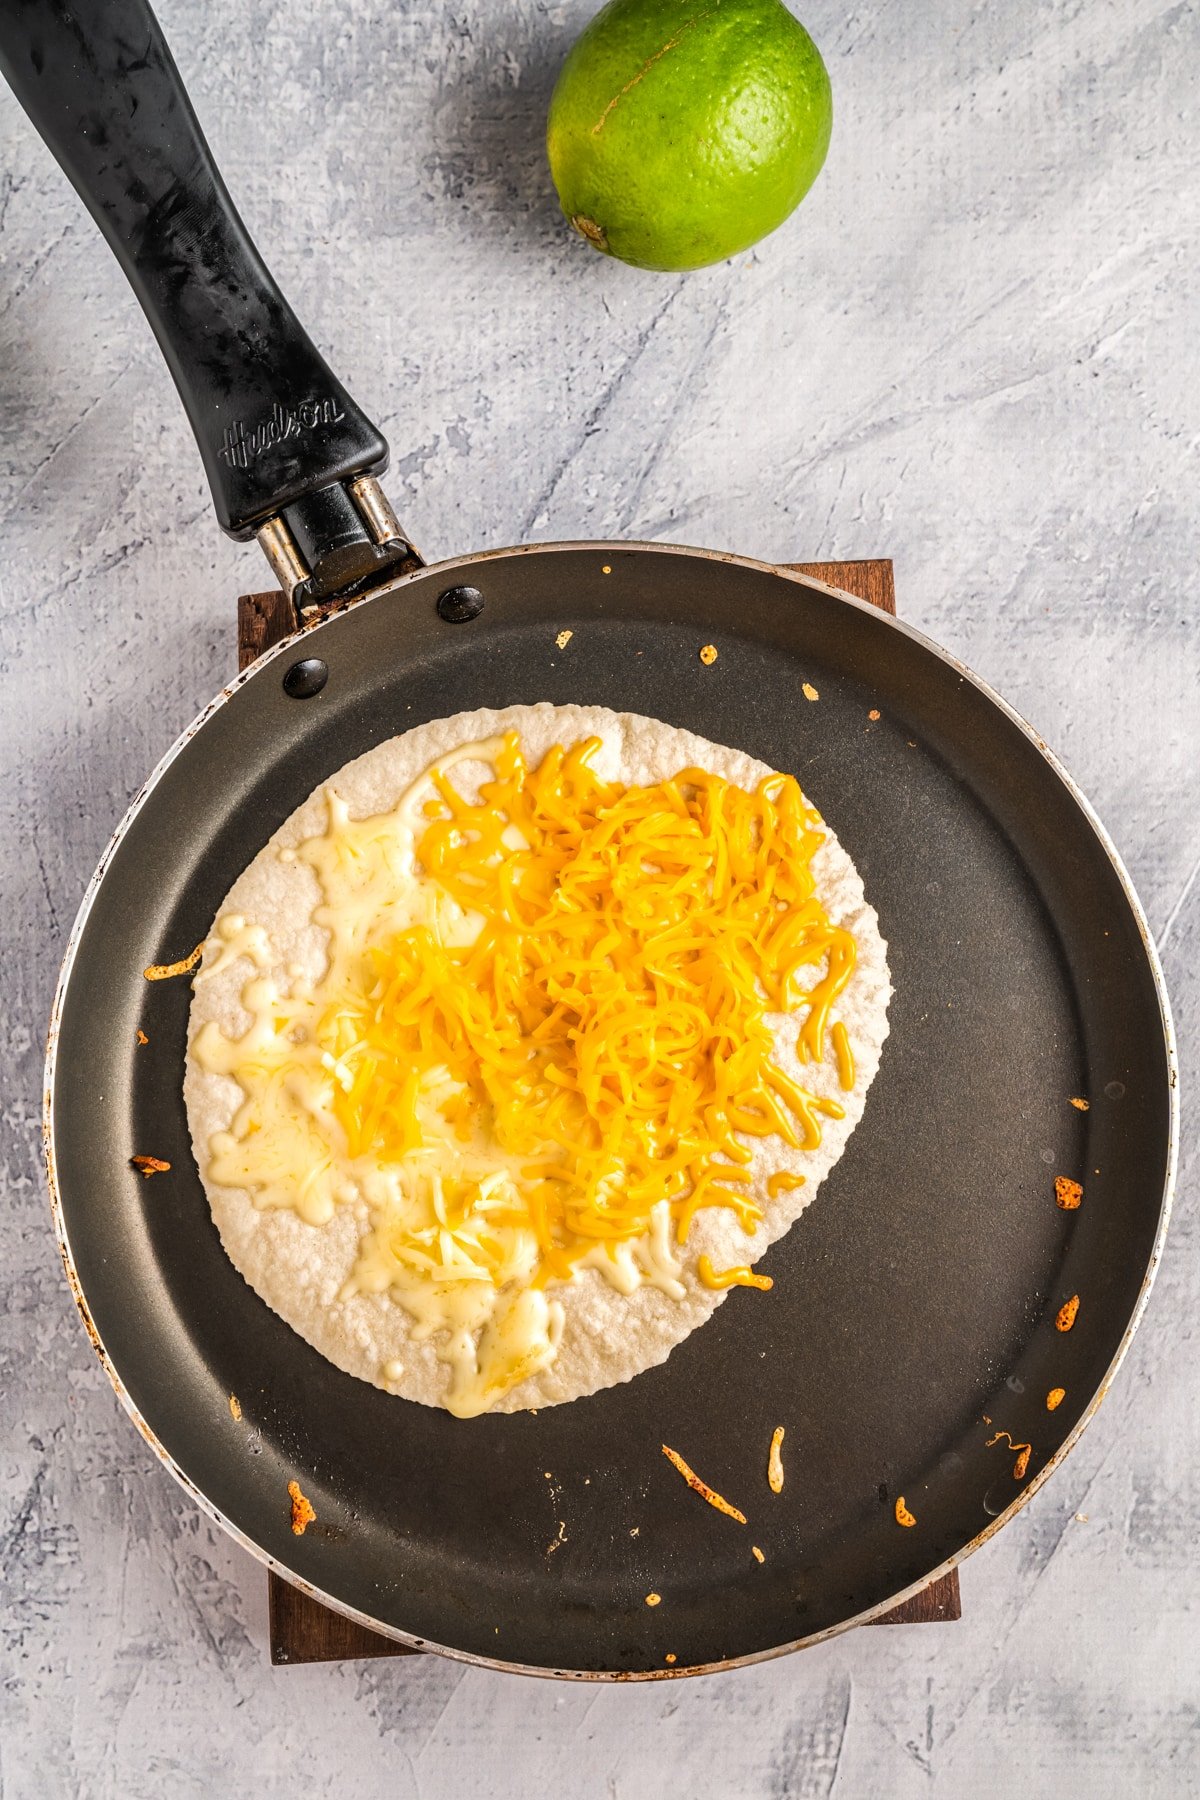 place tortilla on skillet with cheese